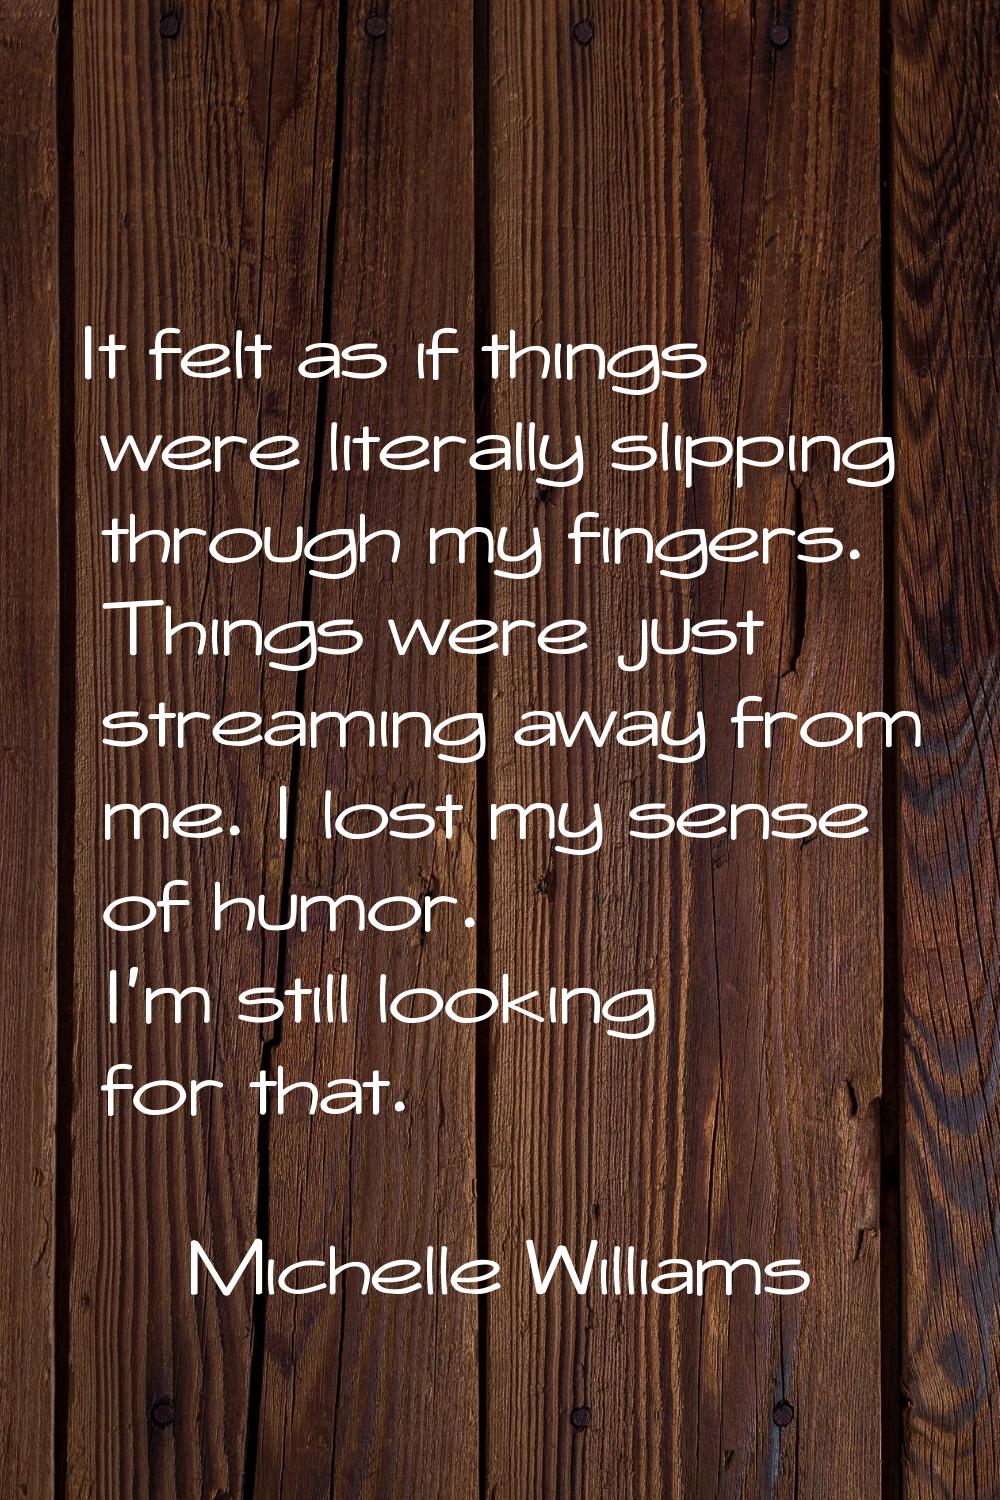 It felt as if things were literally slipping through my fingers. Things were just streaming away fr